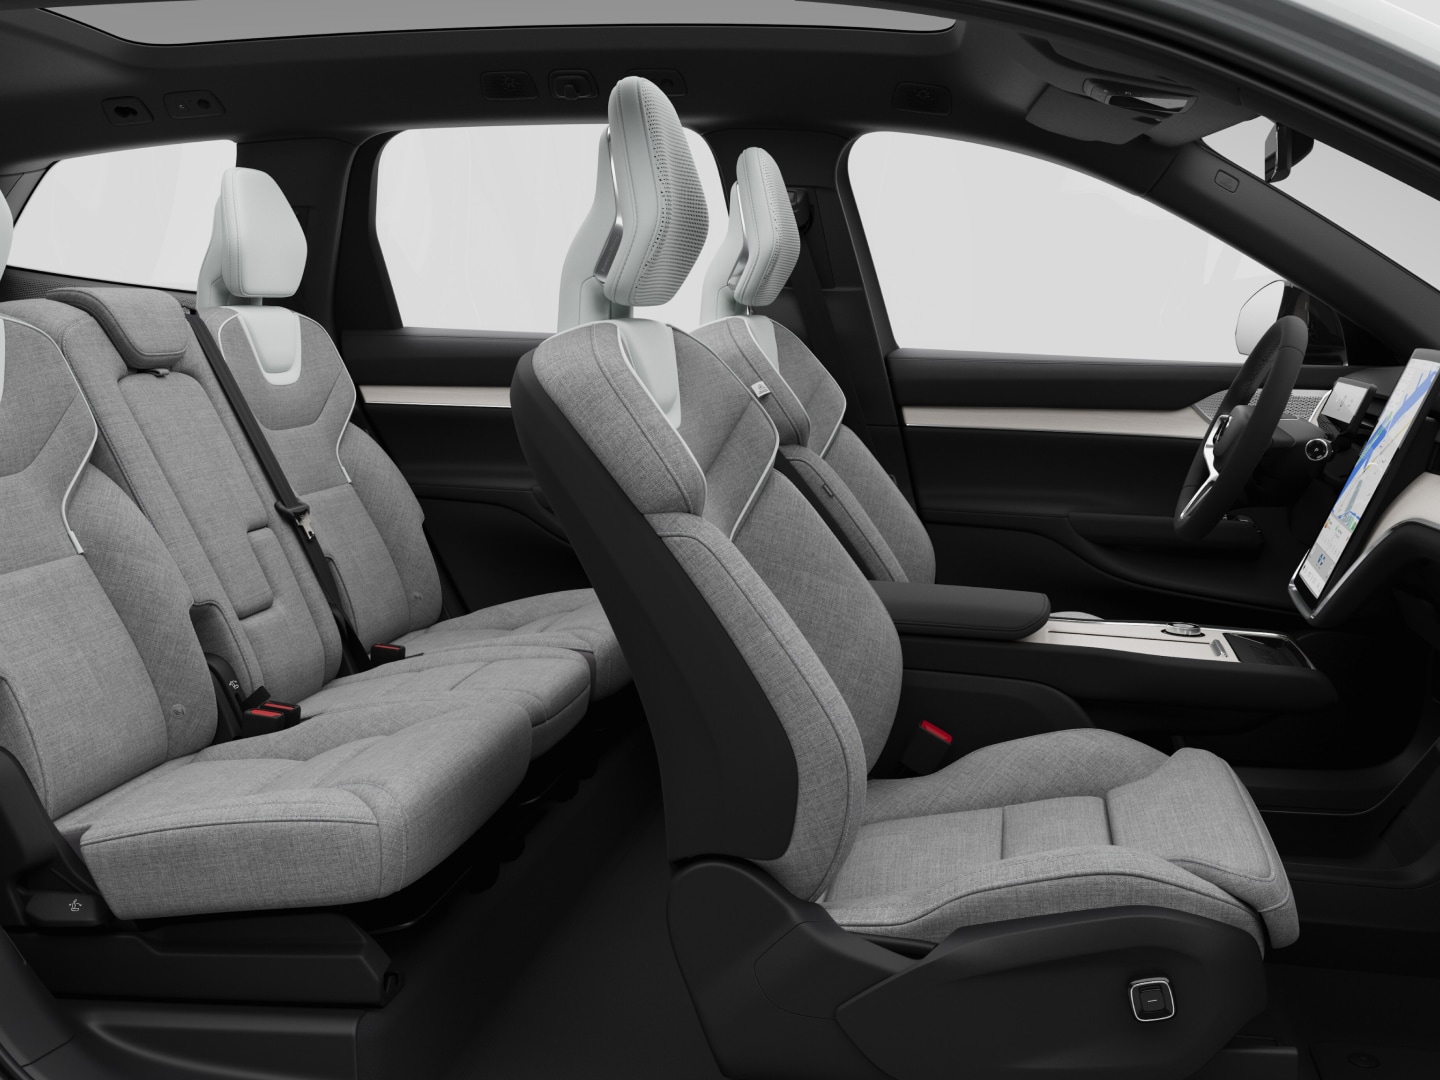 A side view of the seat upholstery of a Volvo EX90 cabin interior. 